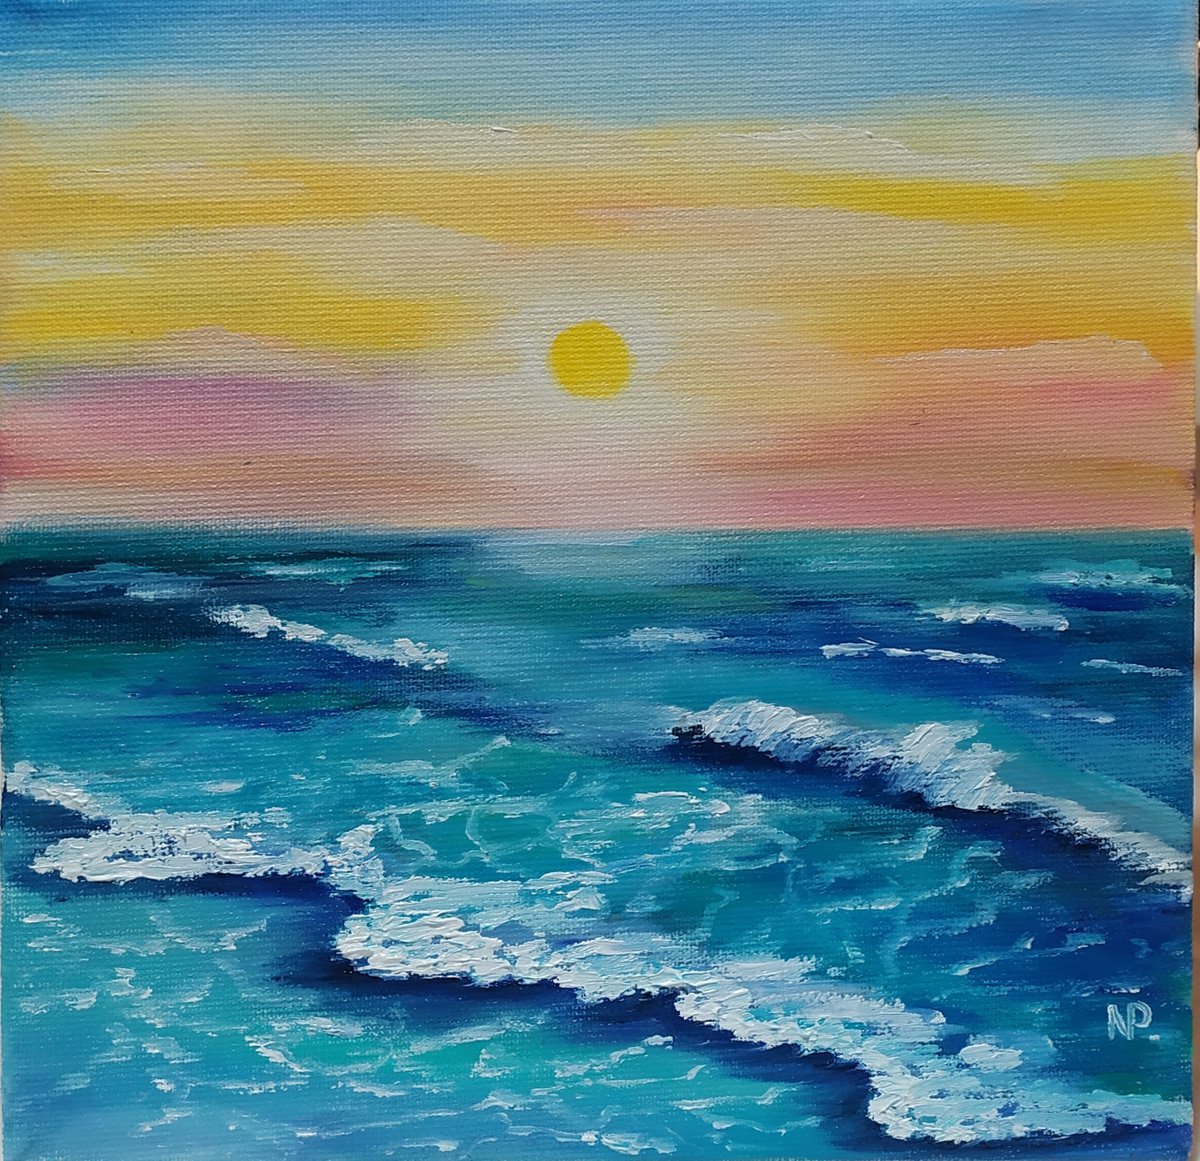 Small waves, small sea landscape oil painting, gift art, bedroom painting by Nataliia Plakhotnyk